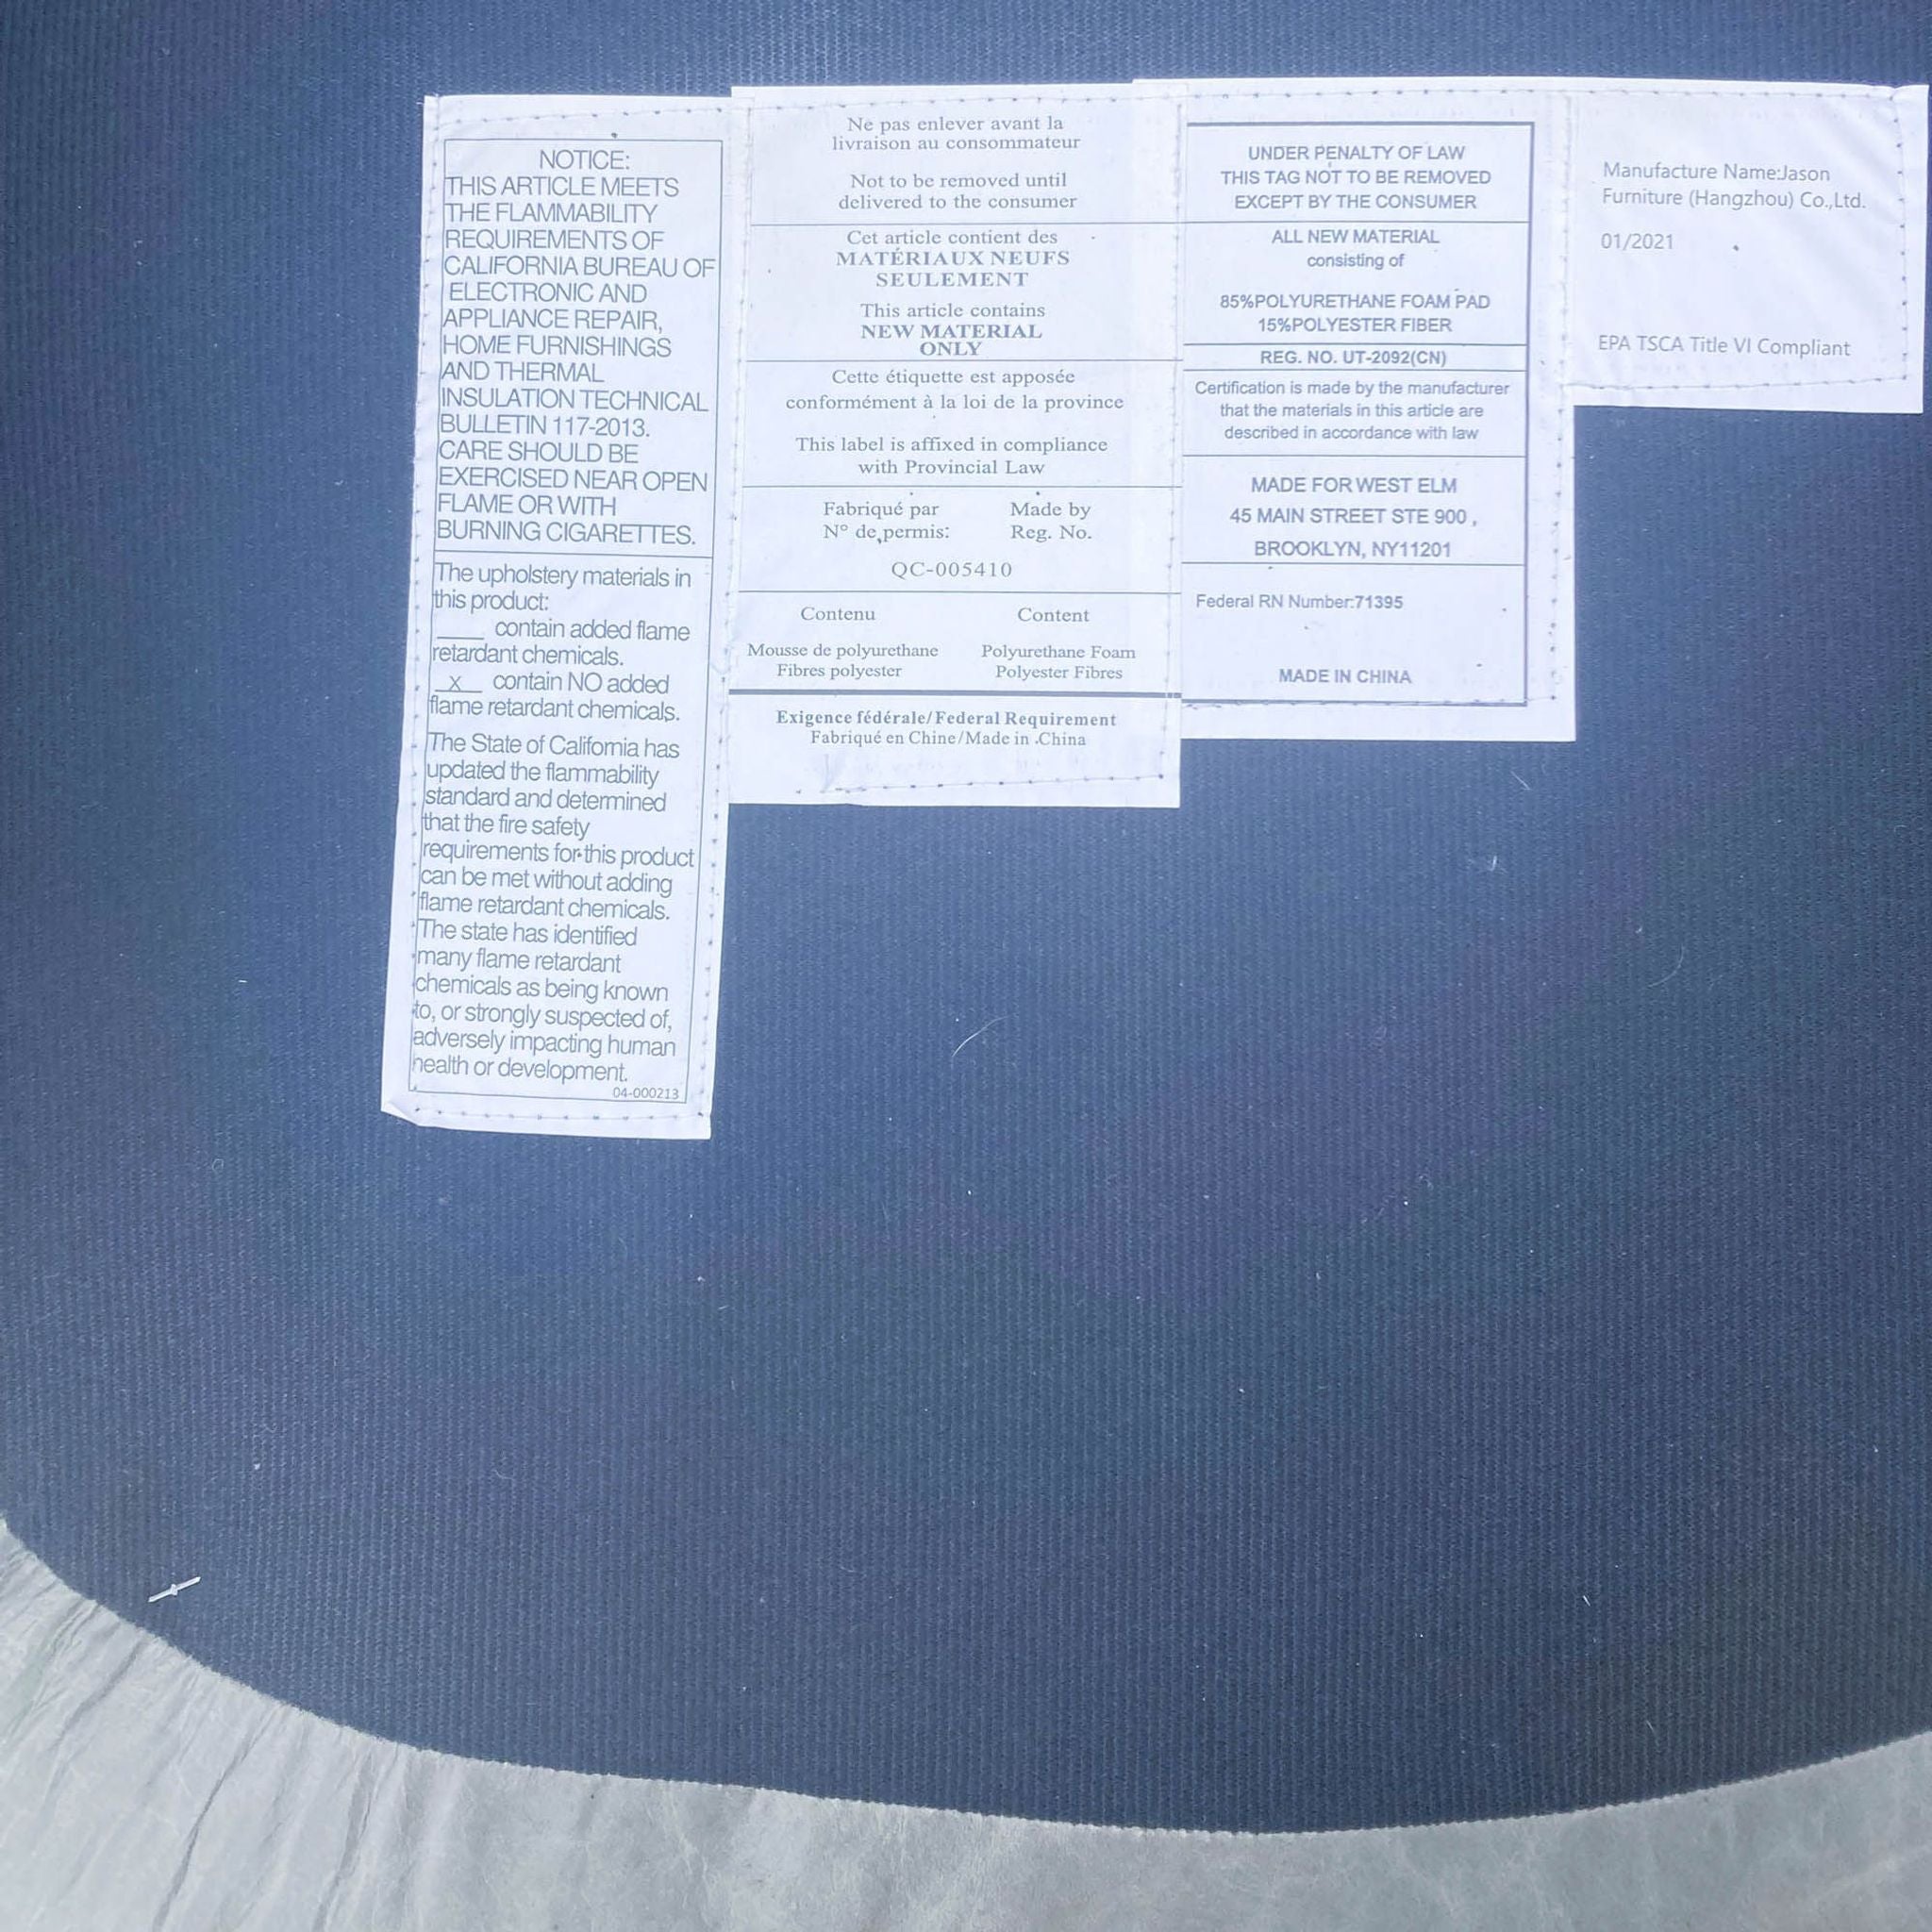 Care label and description tags attached to the West Elm Crescent lounge chair, detailing materials and compliance info.